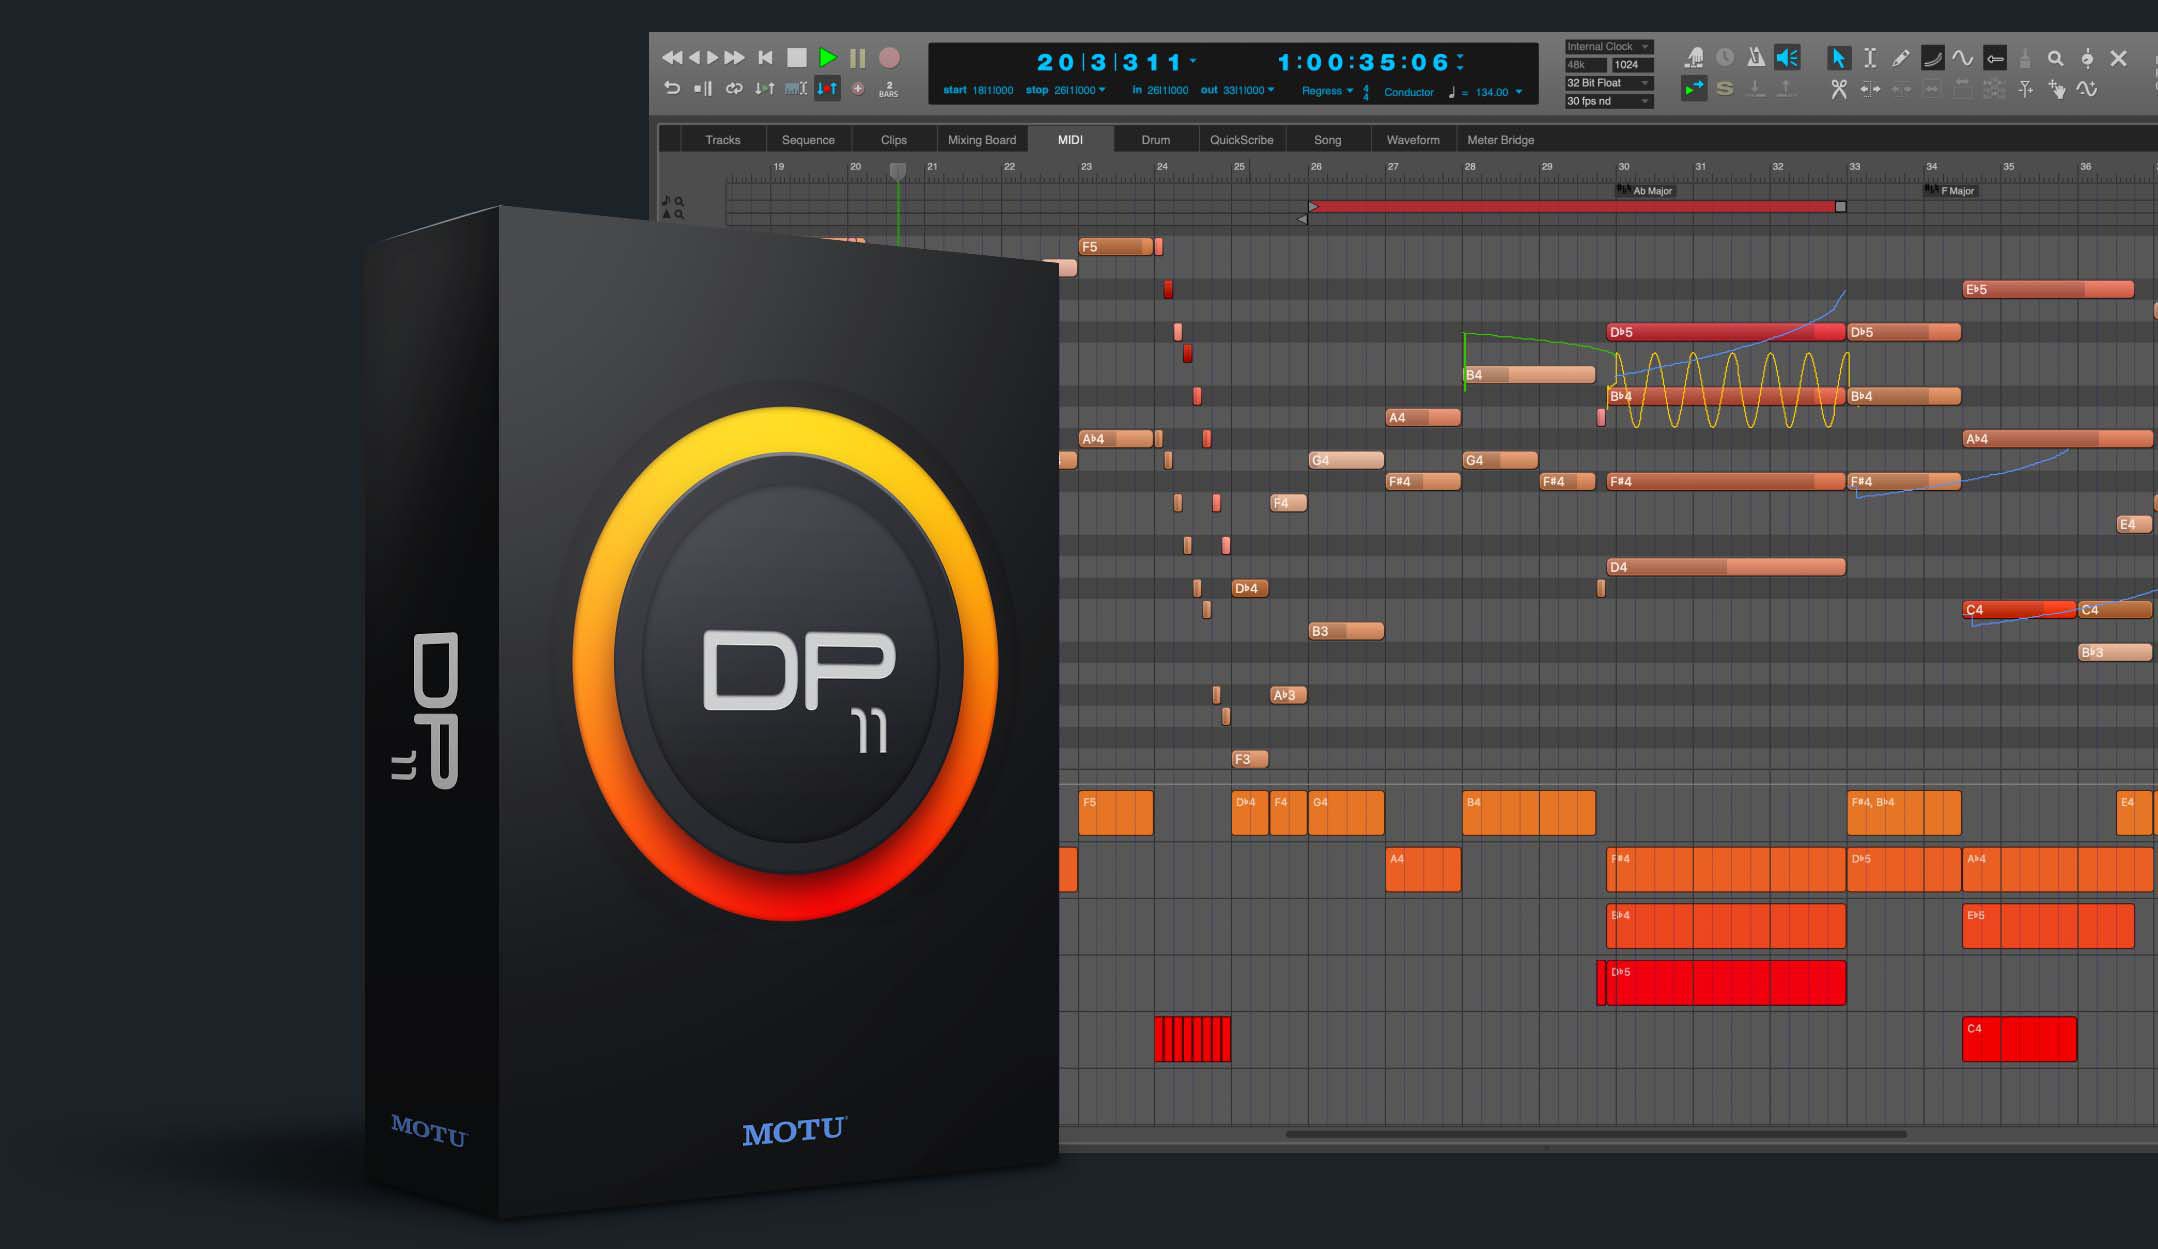 Image of MOTU Digital Performer software interface with various audio tracks and editing tools.